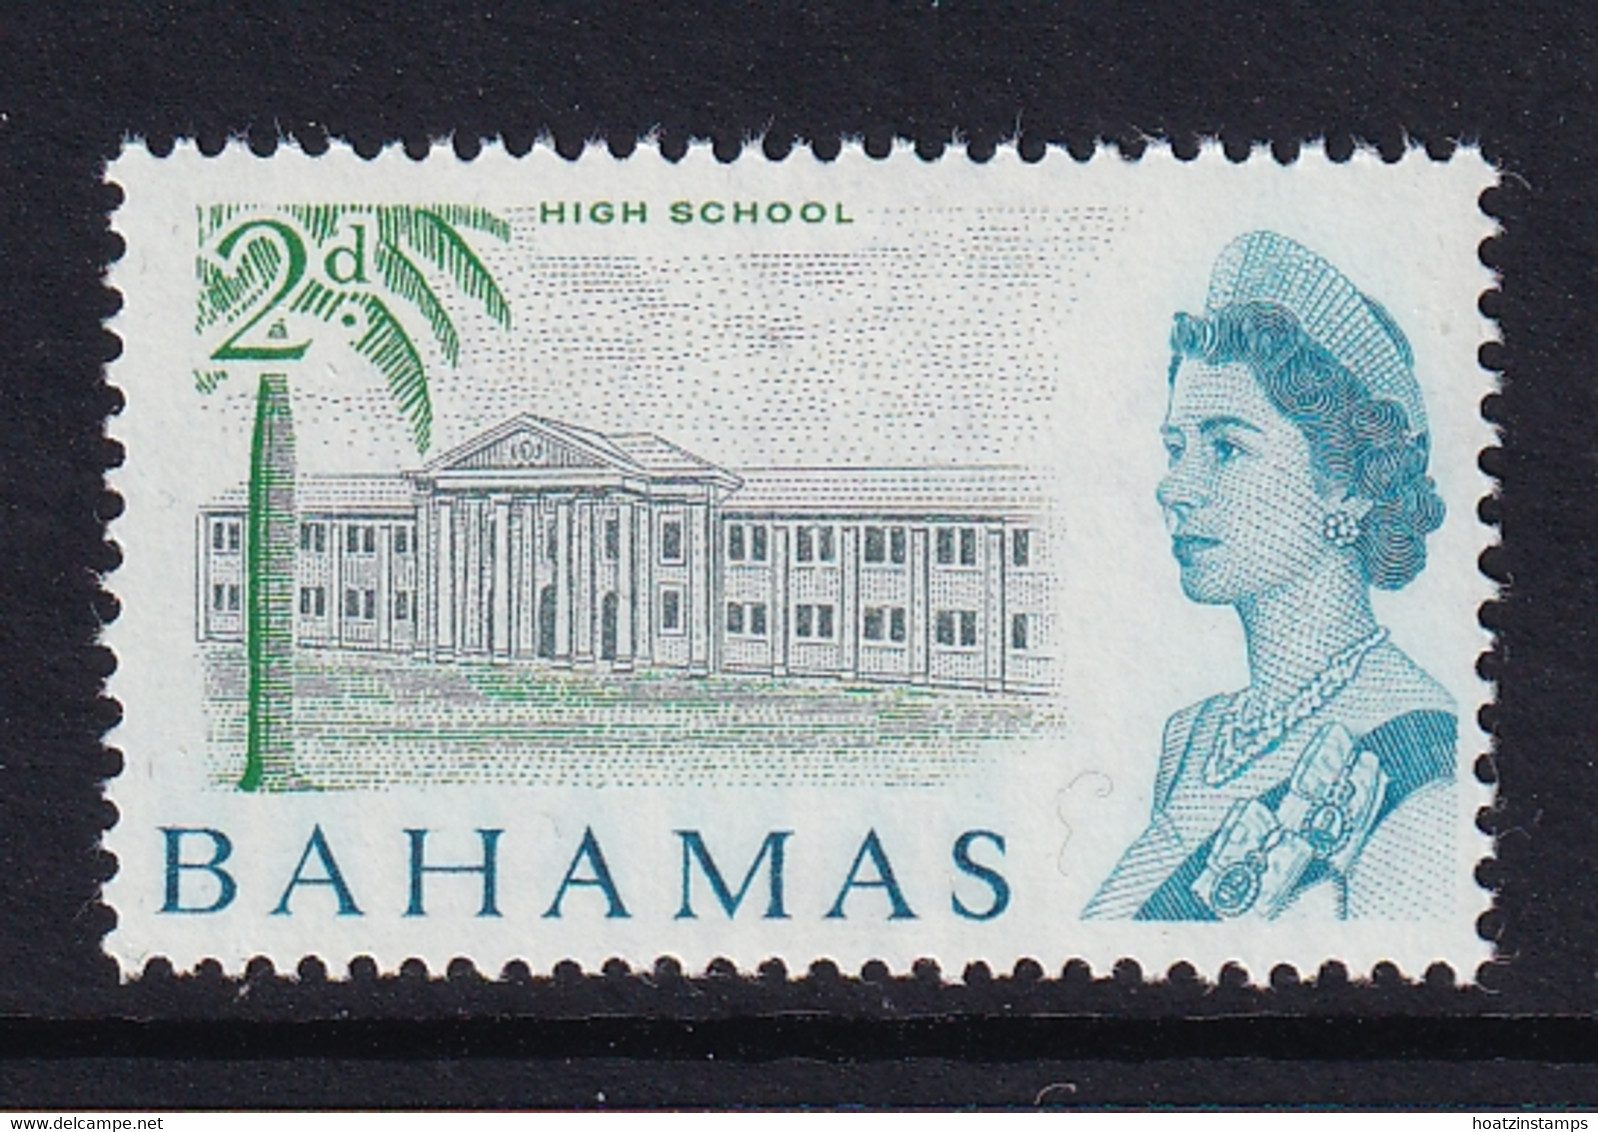 Bahamas: 1965   QE II - Pictorial    SG250   2d    MNH - 1963-1973 Ministerial Government